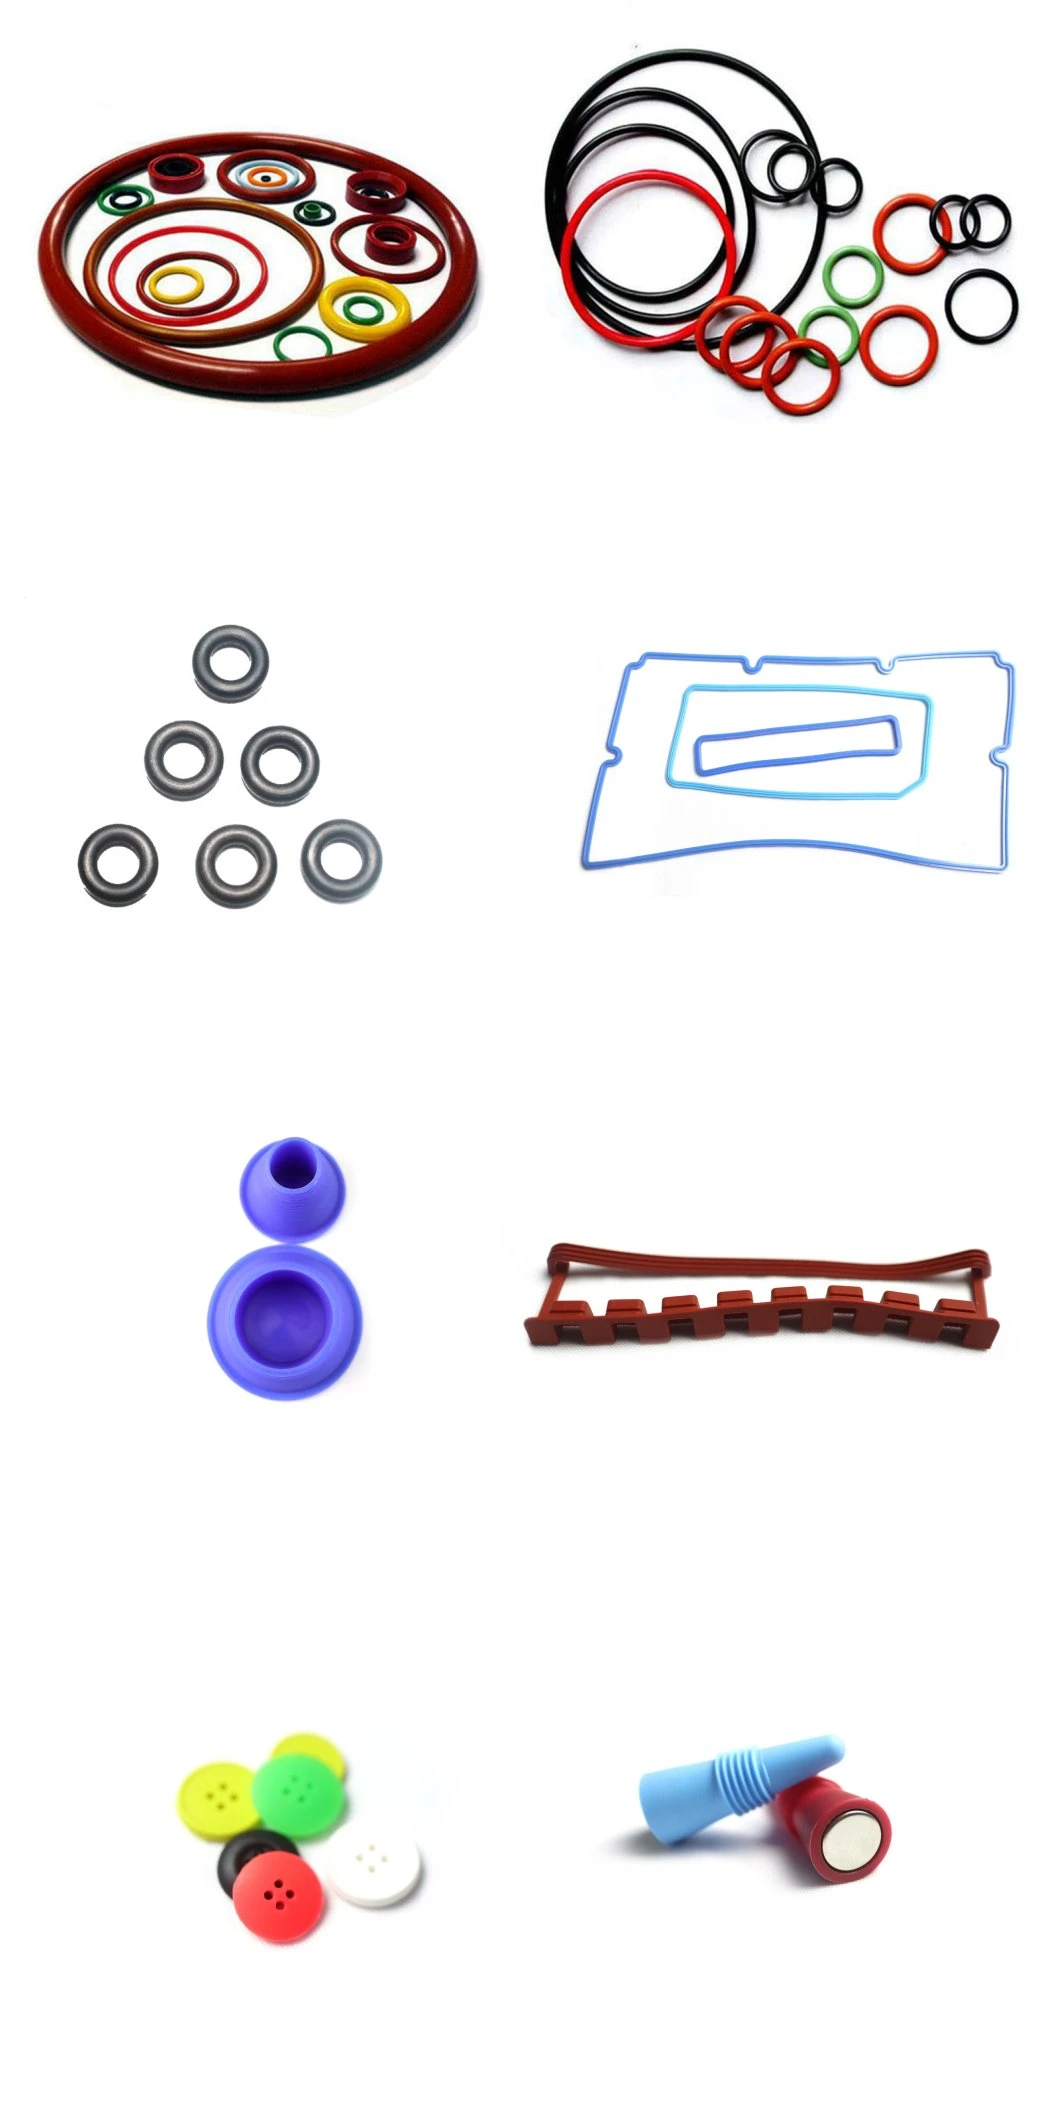 Dustproof Round/Tapered Rubber Grommet Plug Protective Silicone Stopper/Cap, Damper, Gasket for Sealing